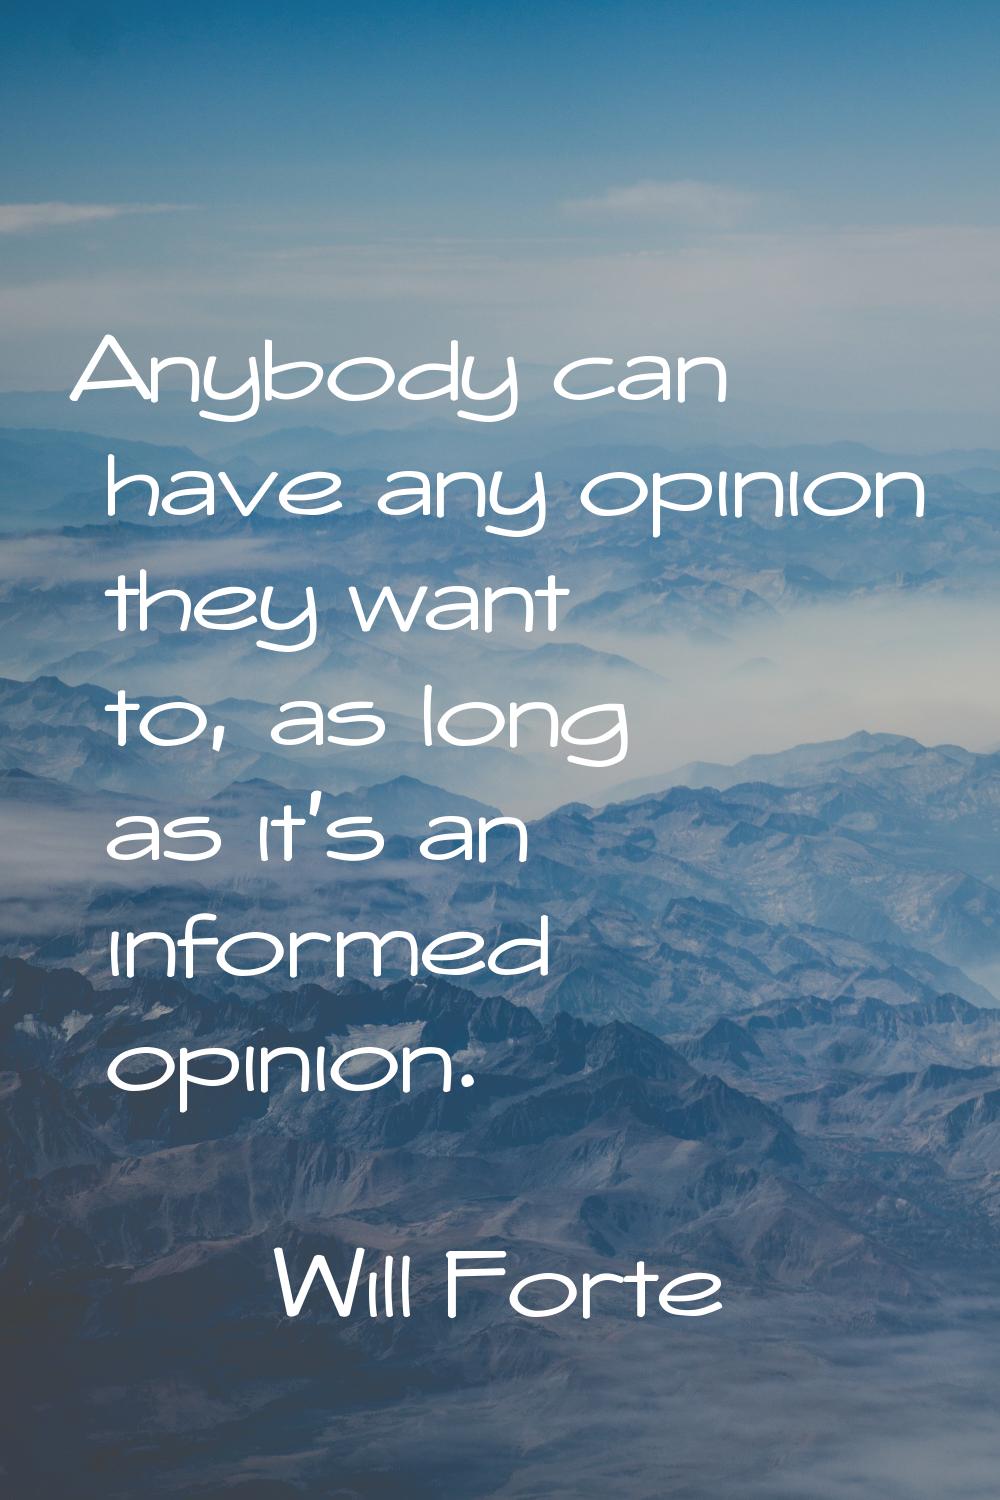 Anybody can have any opinion they want to, as long as it's an informed opinion.